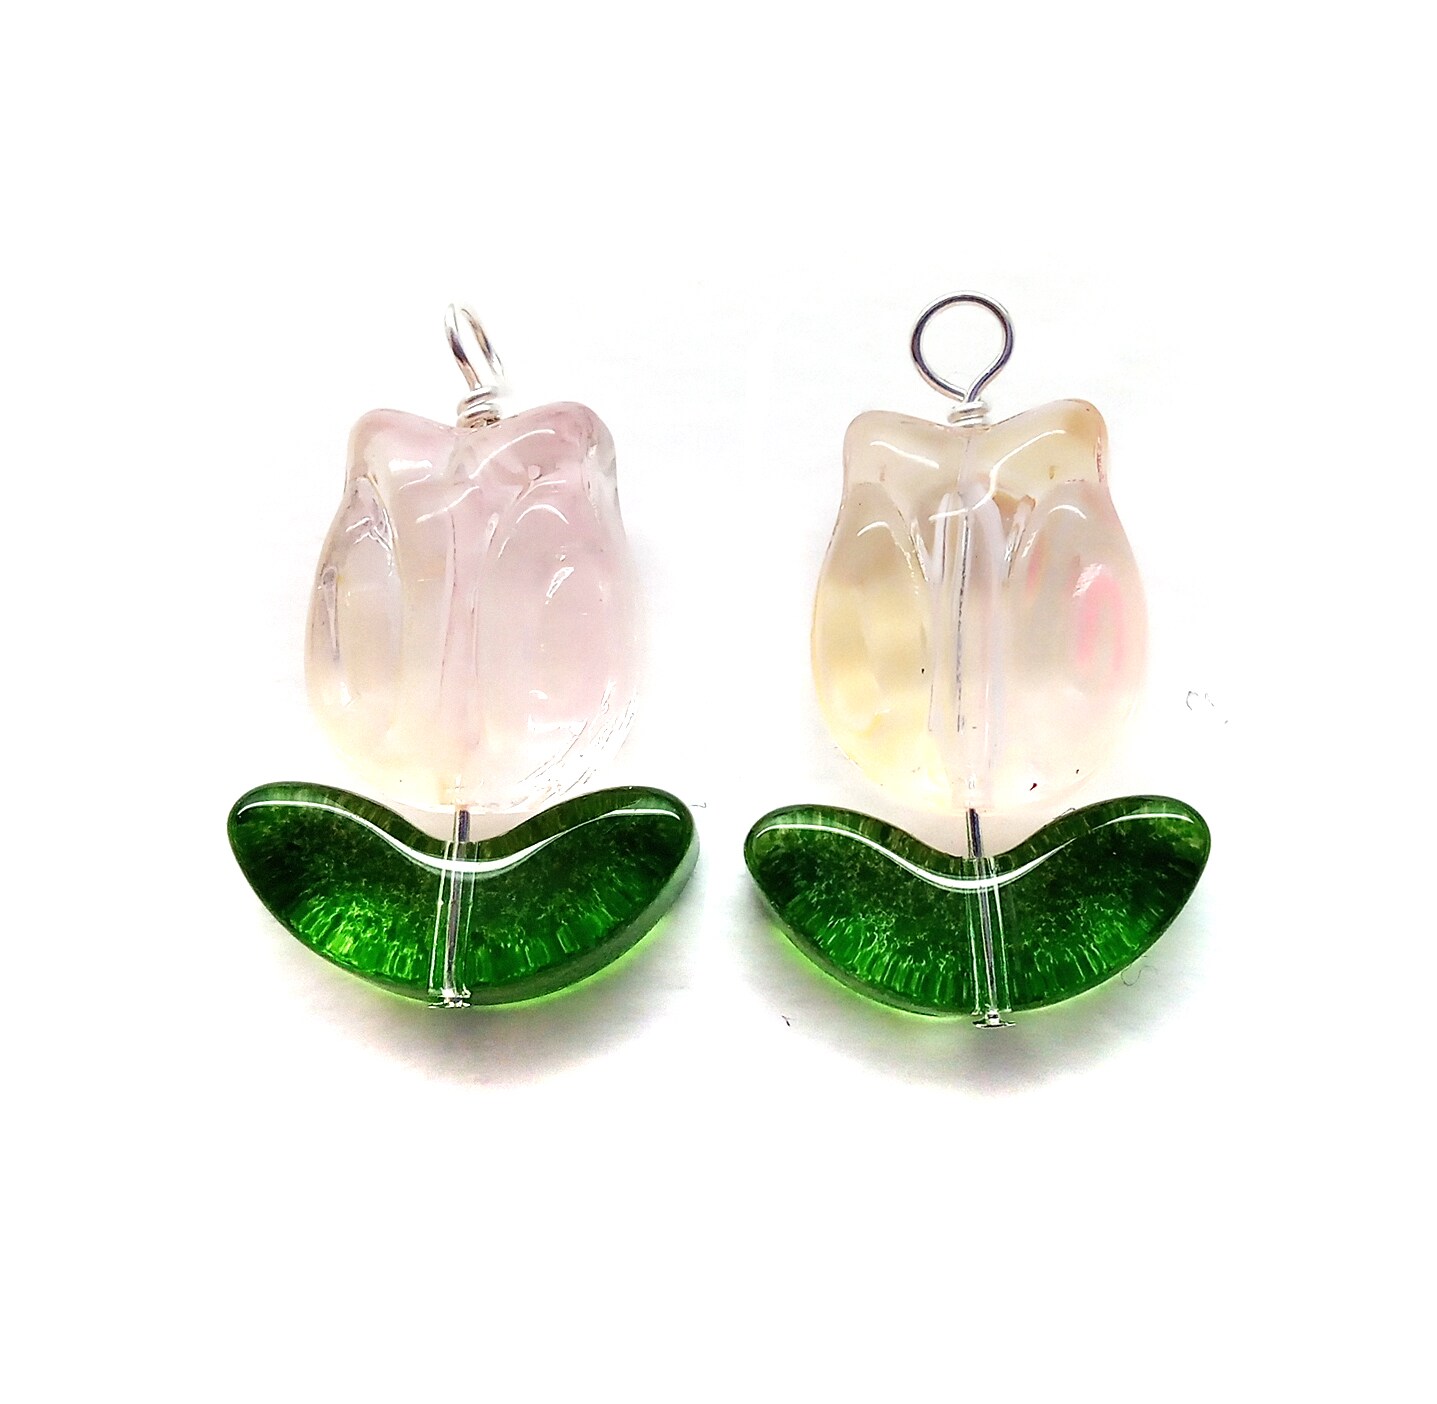 Flower Charms, 2 pcs, Tulip Glass Bead Dangles for Jewelry, Adorabilities